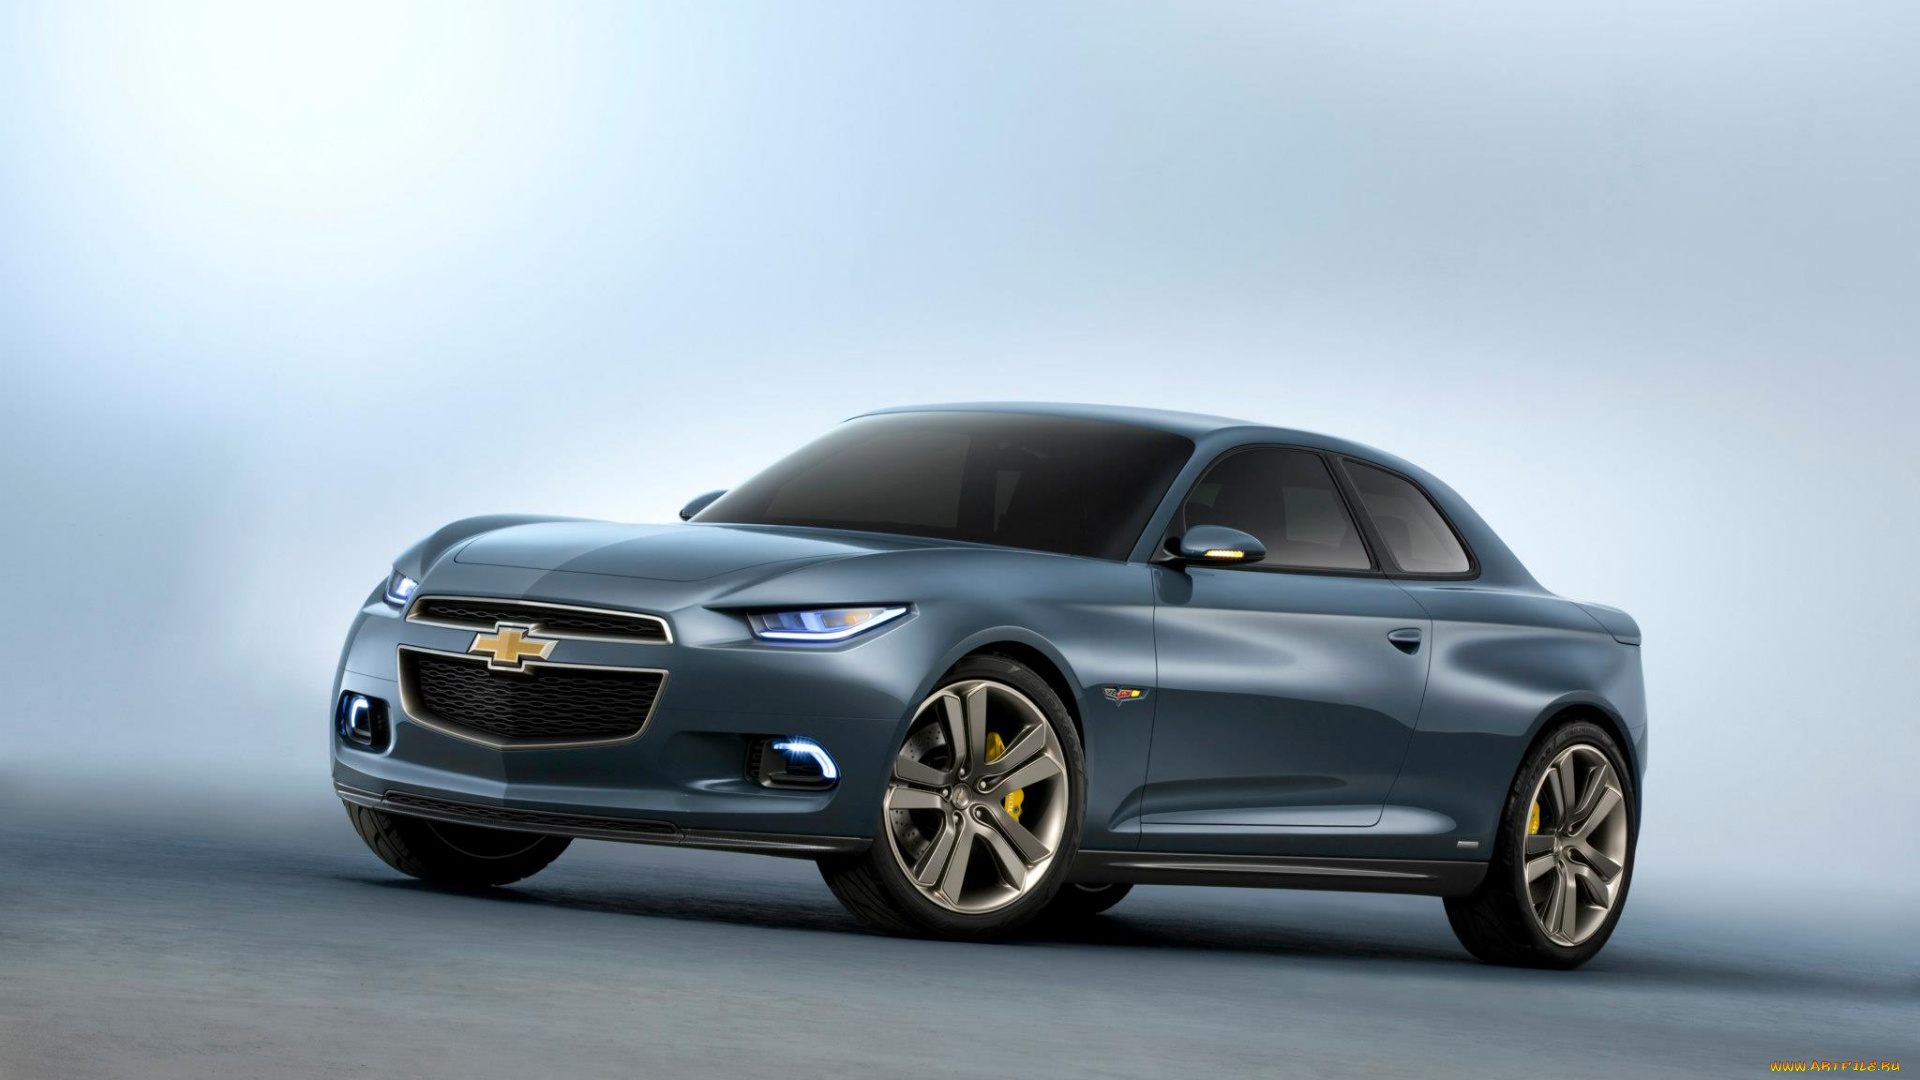 chevrolet, code, 130, rs, concept, 2012, автомобили, chevrolet, 130, code, 2012, rs, concept